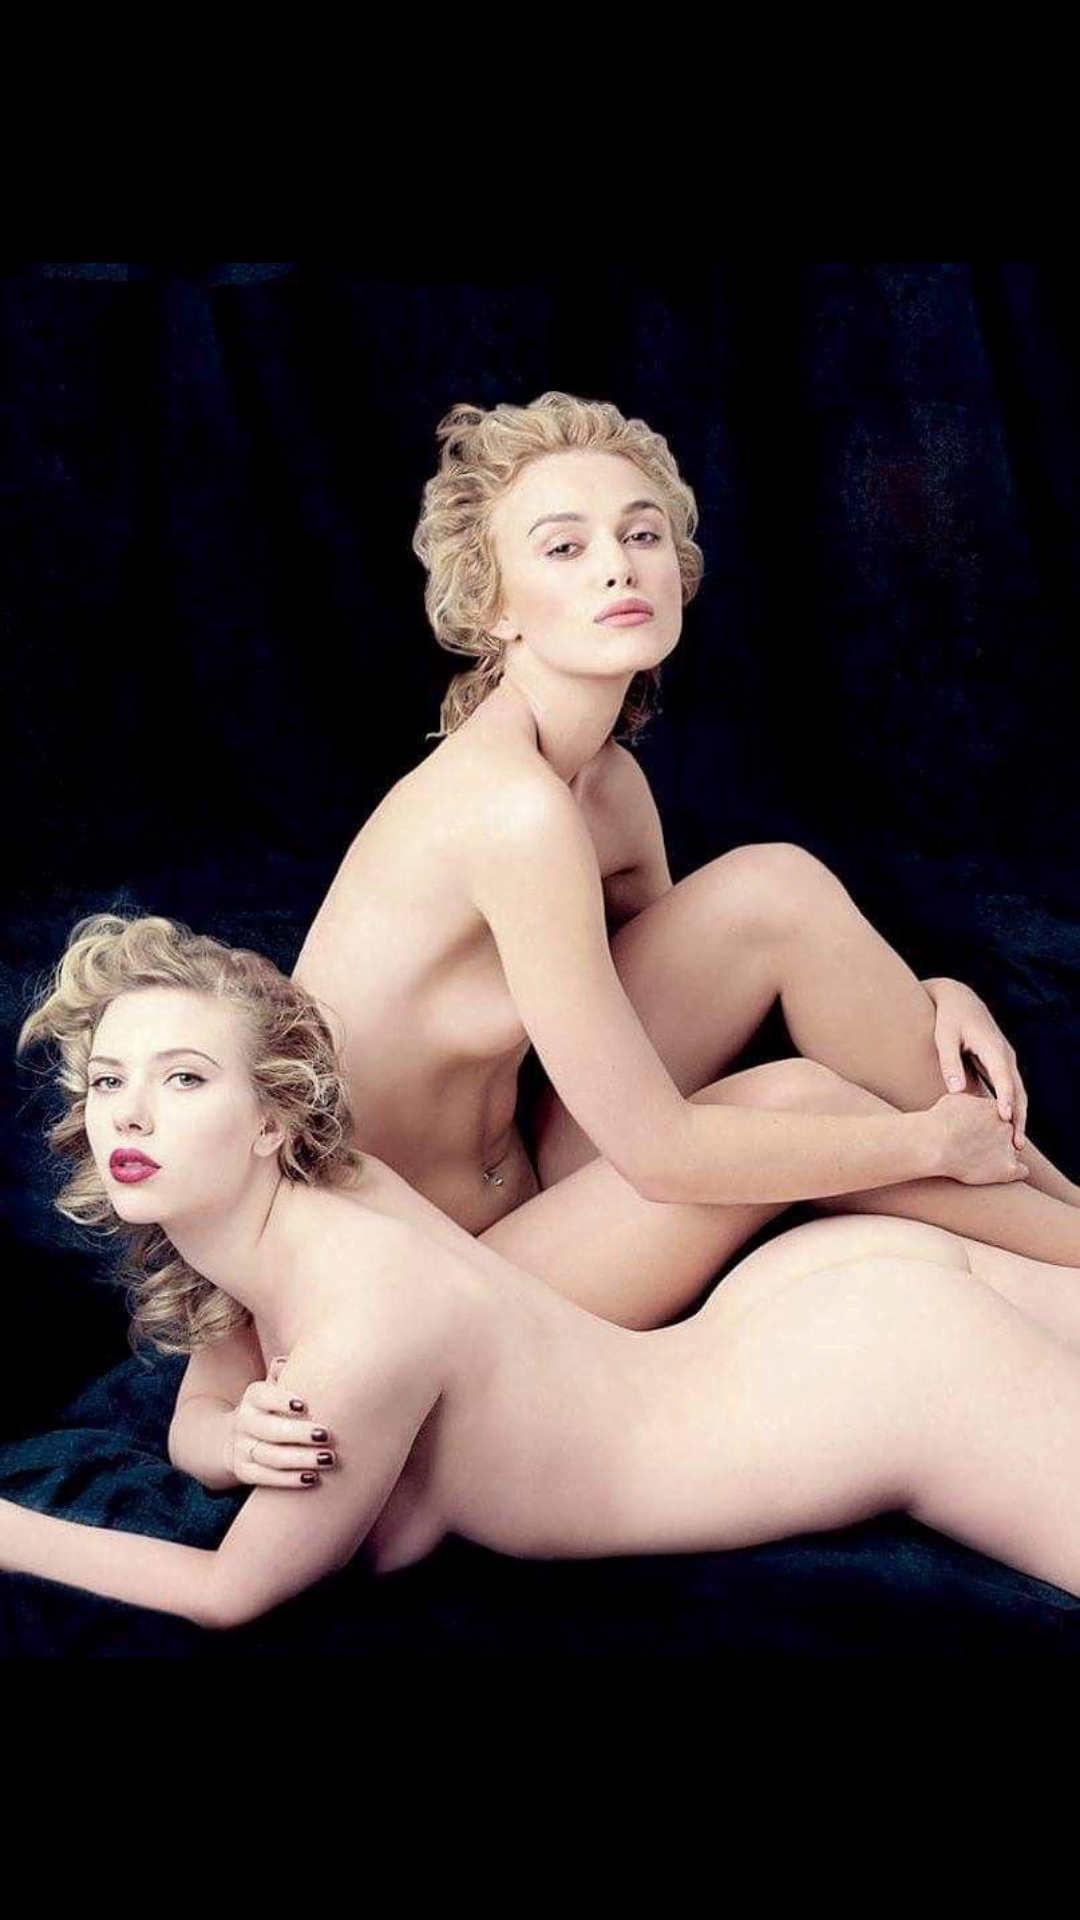 Scarlett Johansson and Keira Knightly waiting to be covered in